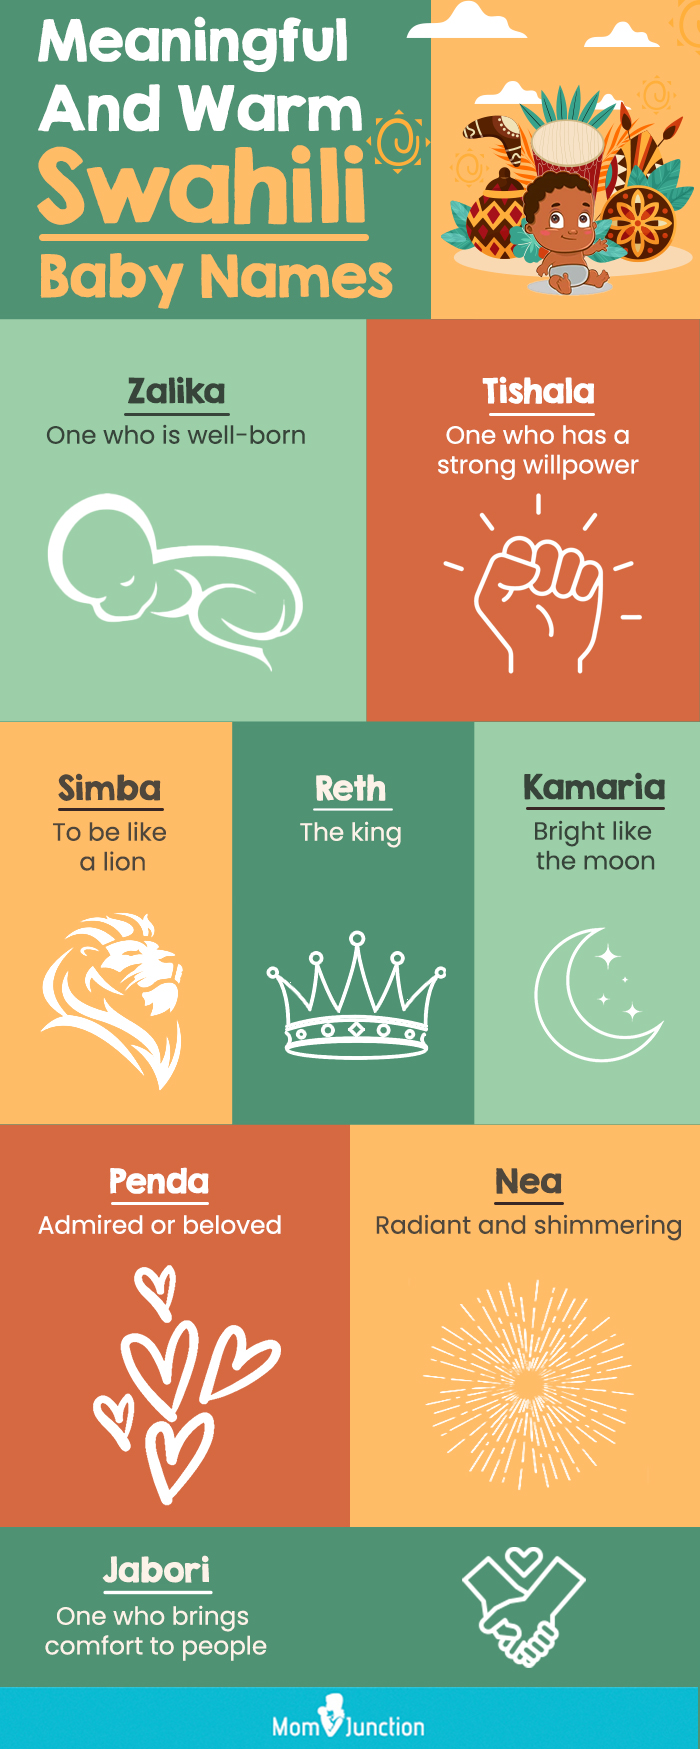 meaningful and warm swahili baby names (infographic)